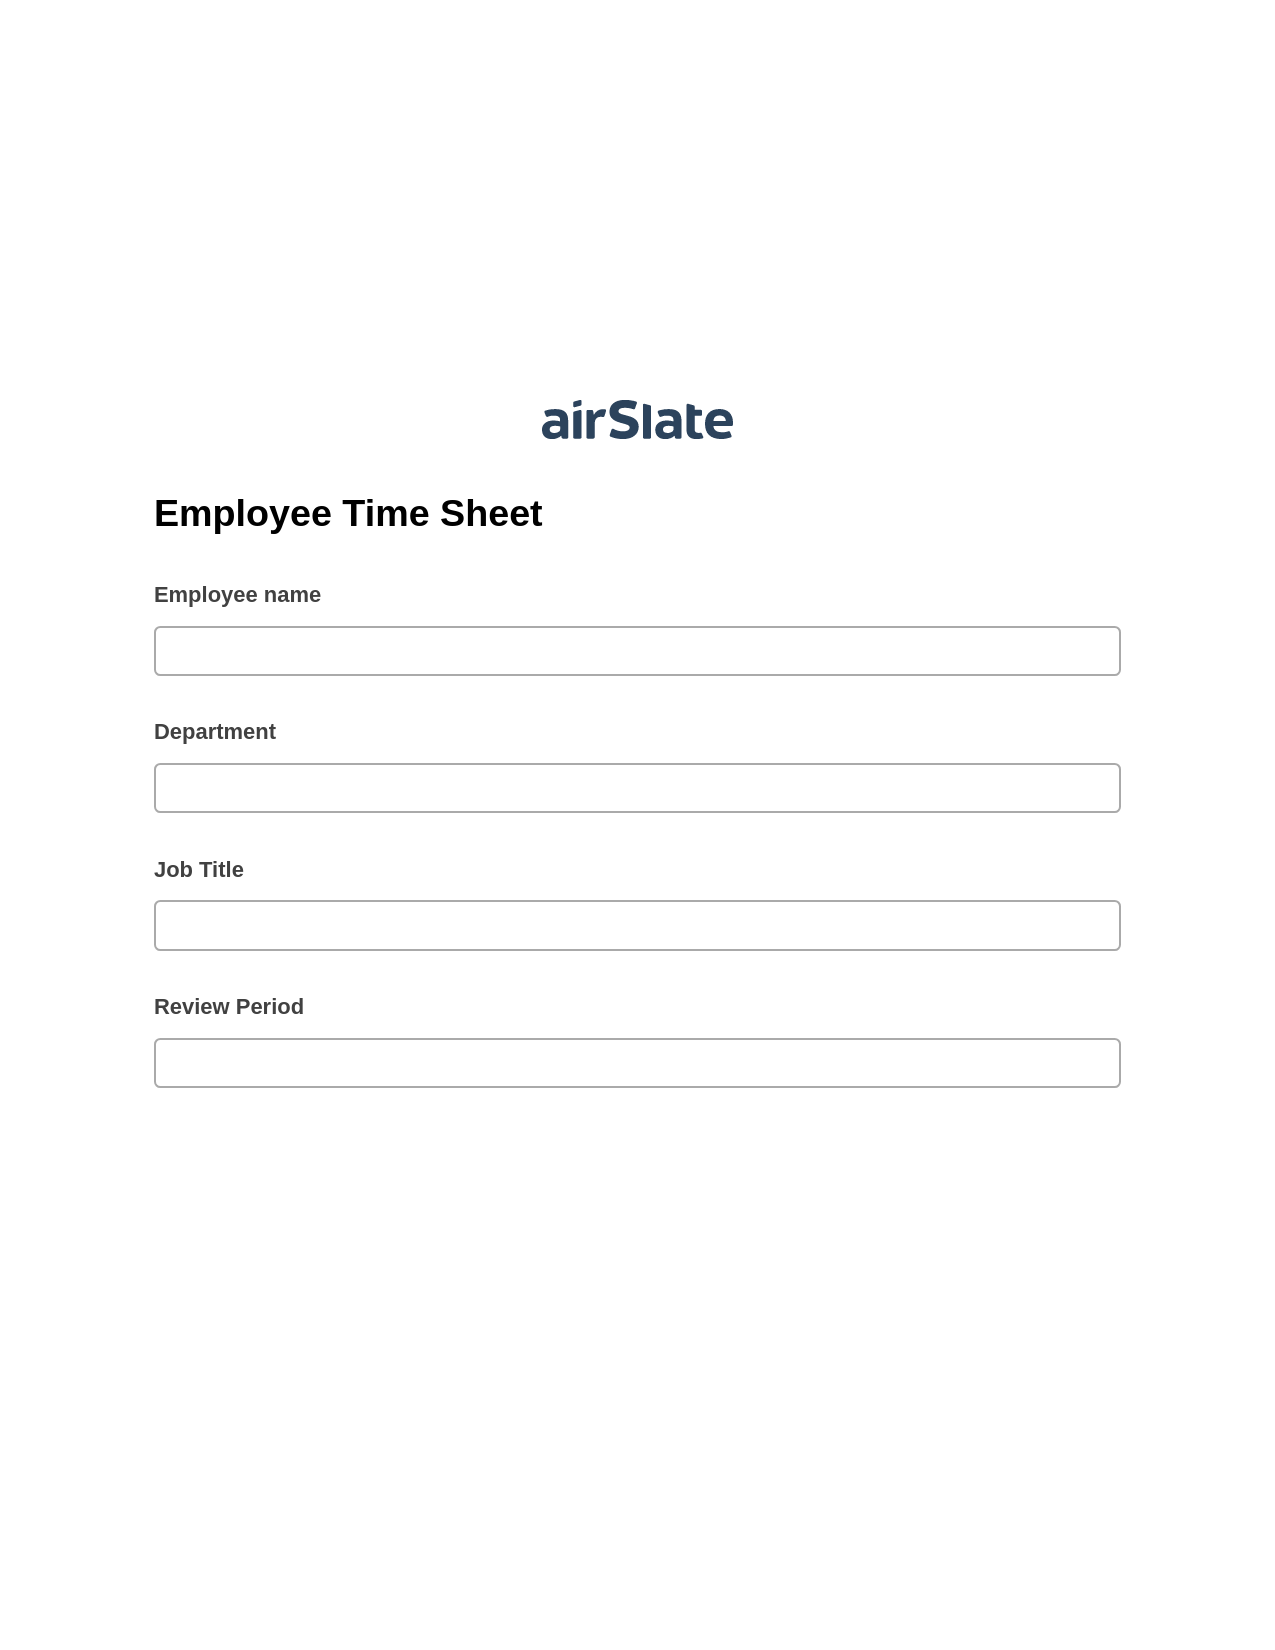 Multirole Employee Time Sheet Pre-fill from another Slate Bot, Lock the Slate Bot, Export to Salesforce Record Bot